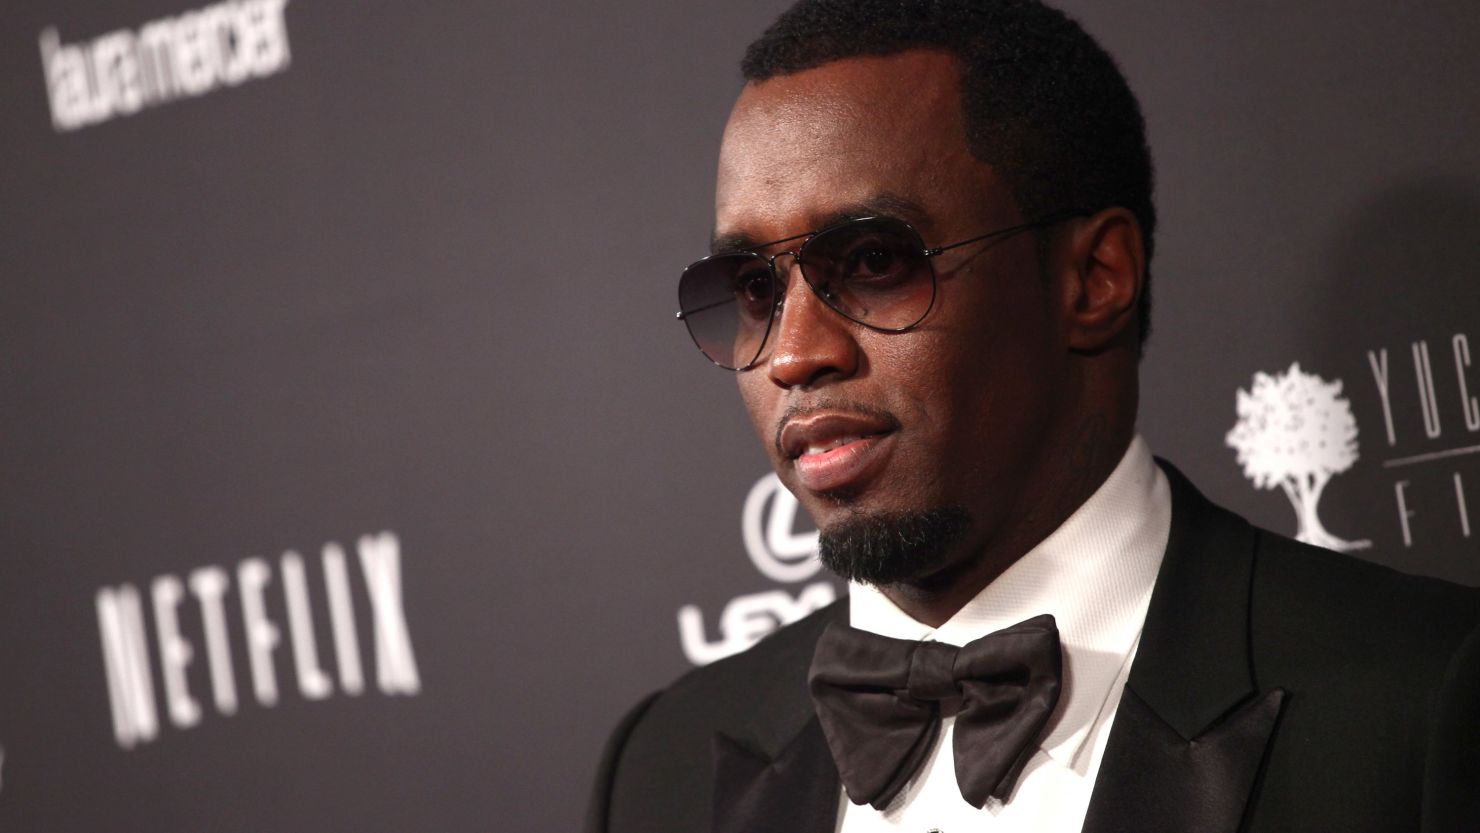 Sean Combs, seen here in January 2014, is resuming his use of his "Puff Daddy" moniker.